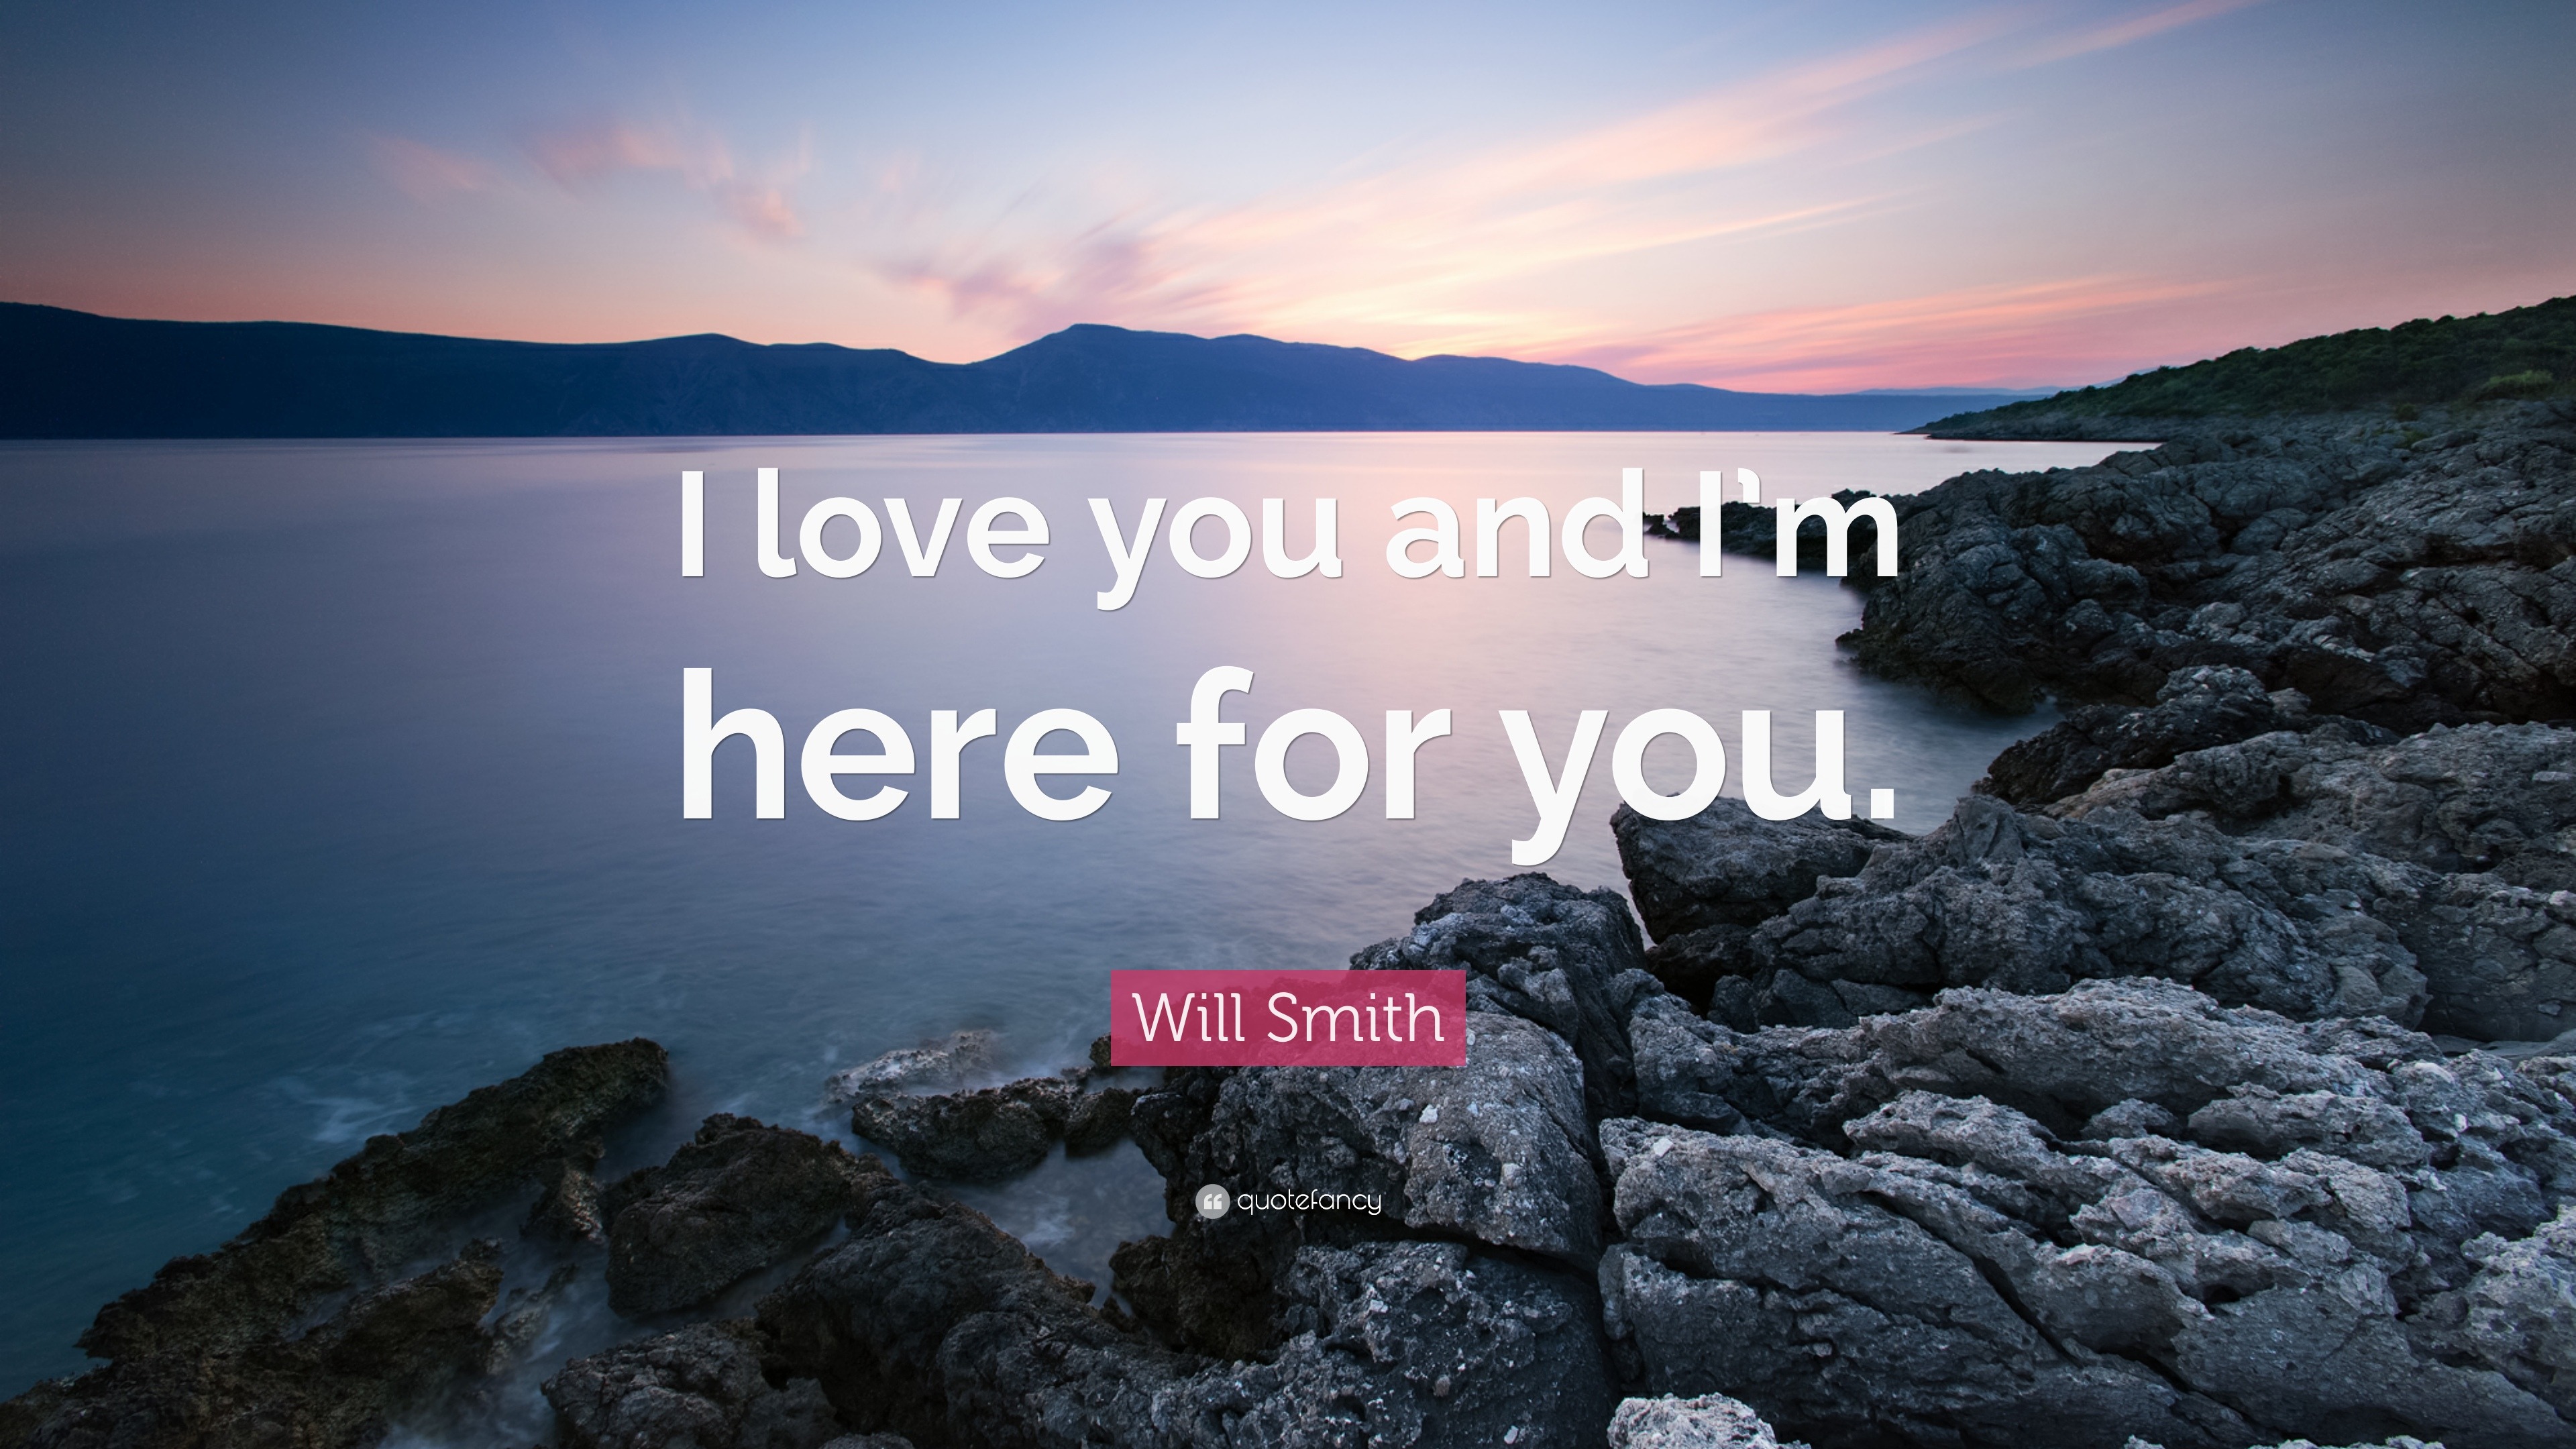 Will Smith Quote “I love you and I m here for you